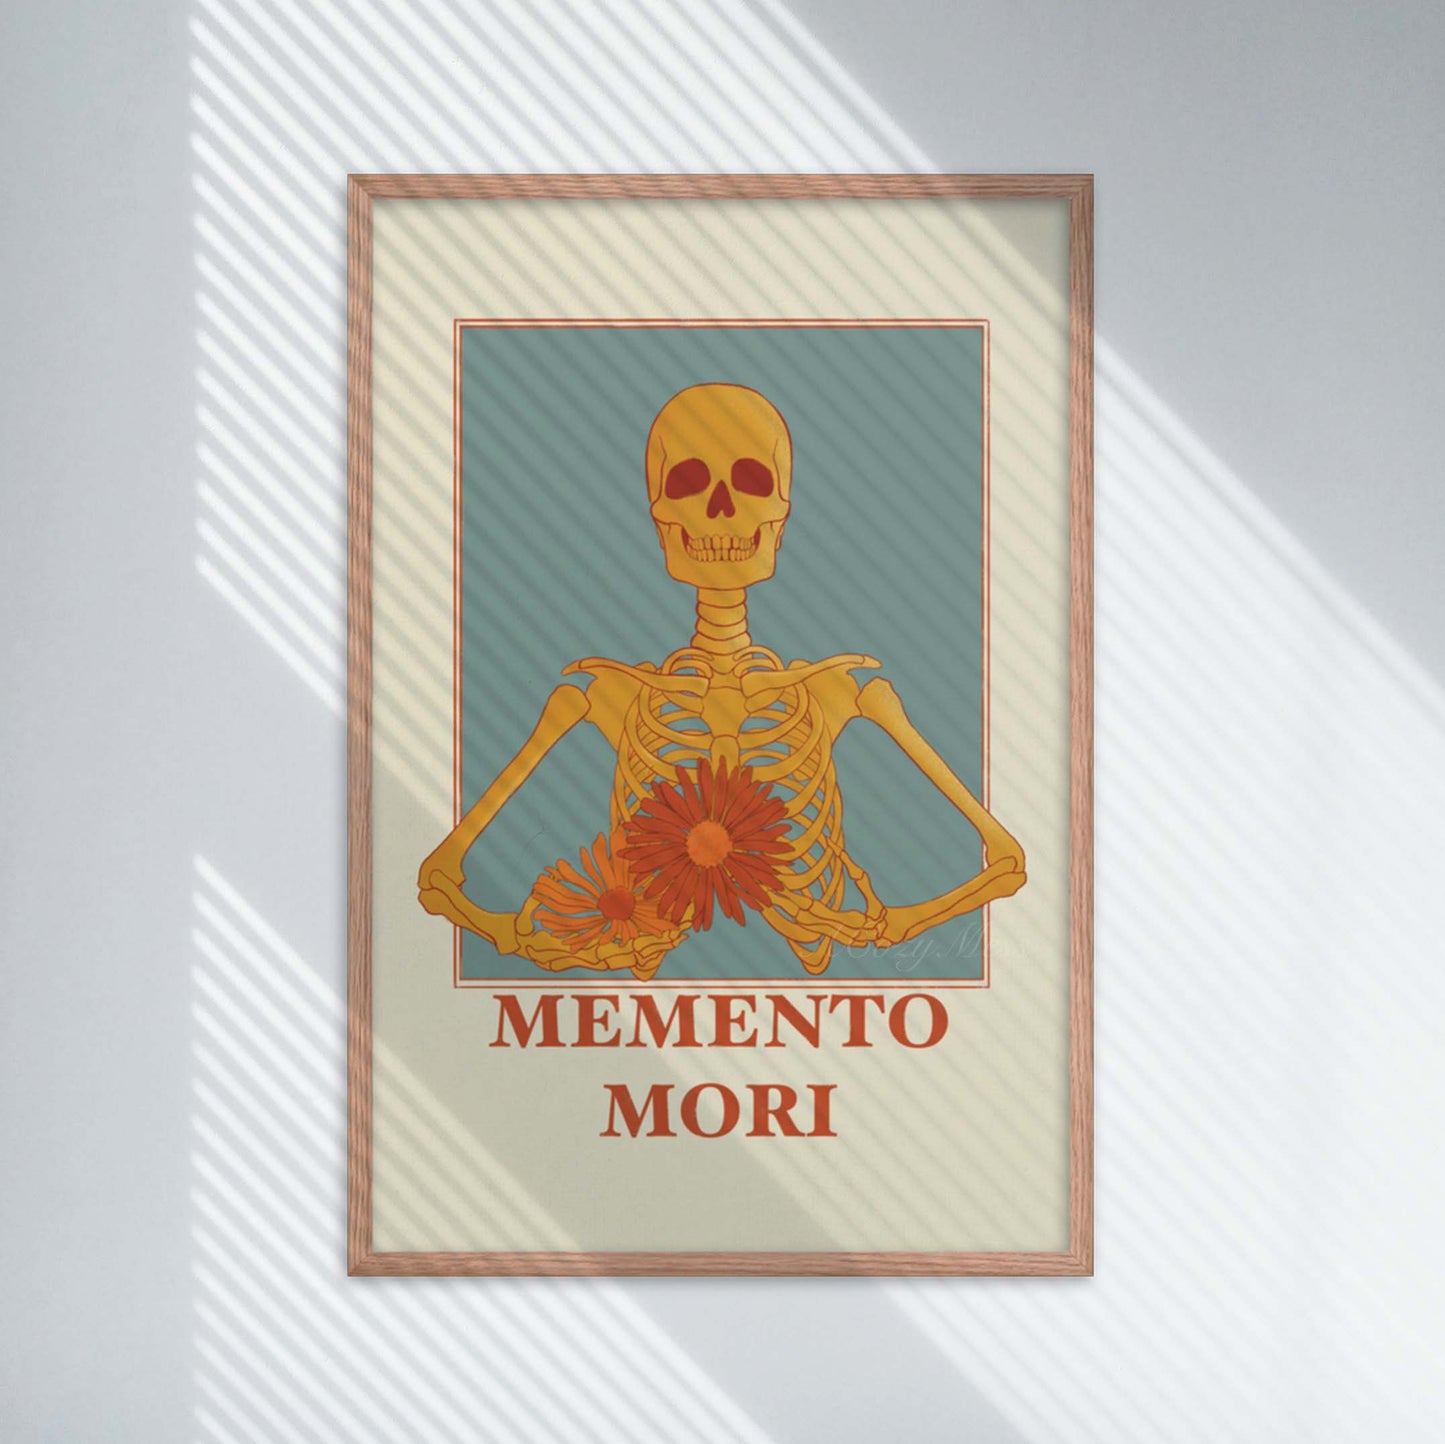 A memento mori art piece in beige blue, yellow & orange hues, featuring a skeleton carrying colorful flowers in oak frame